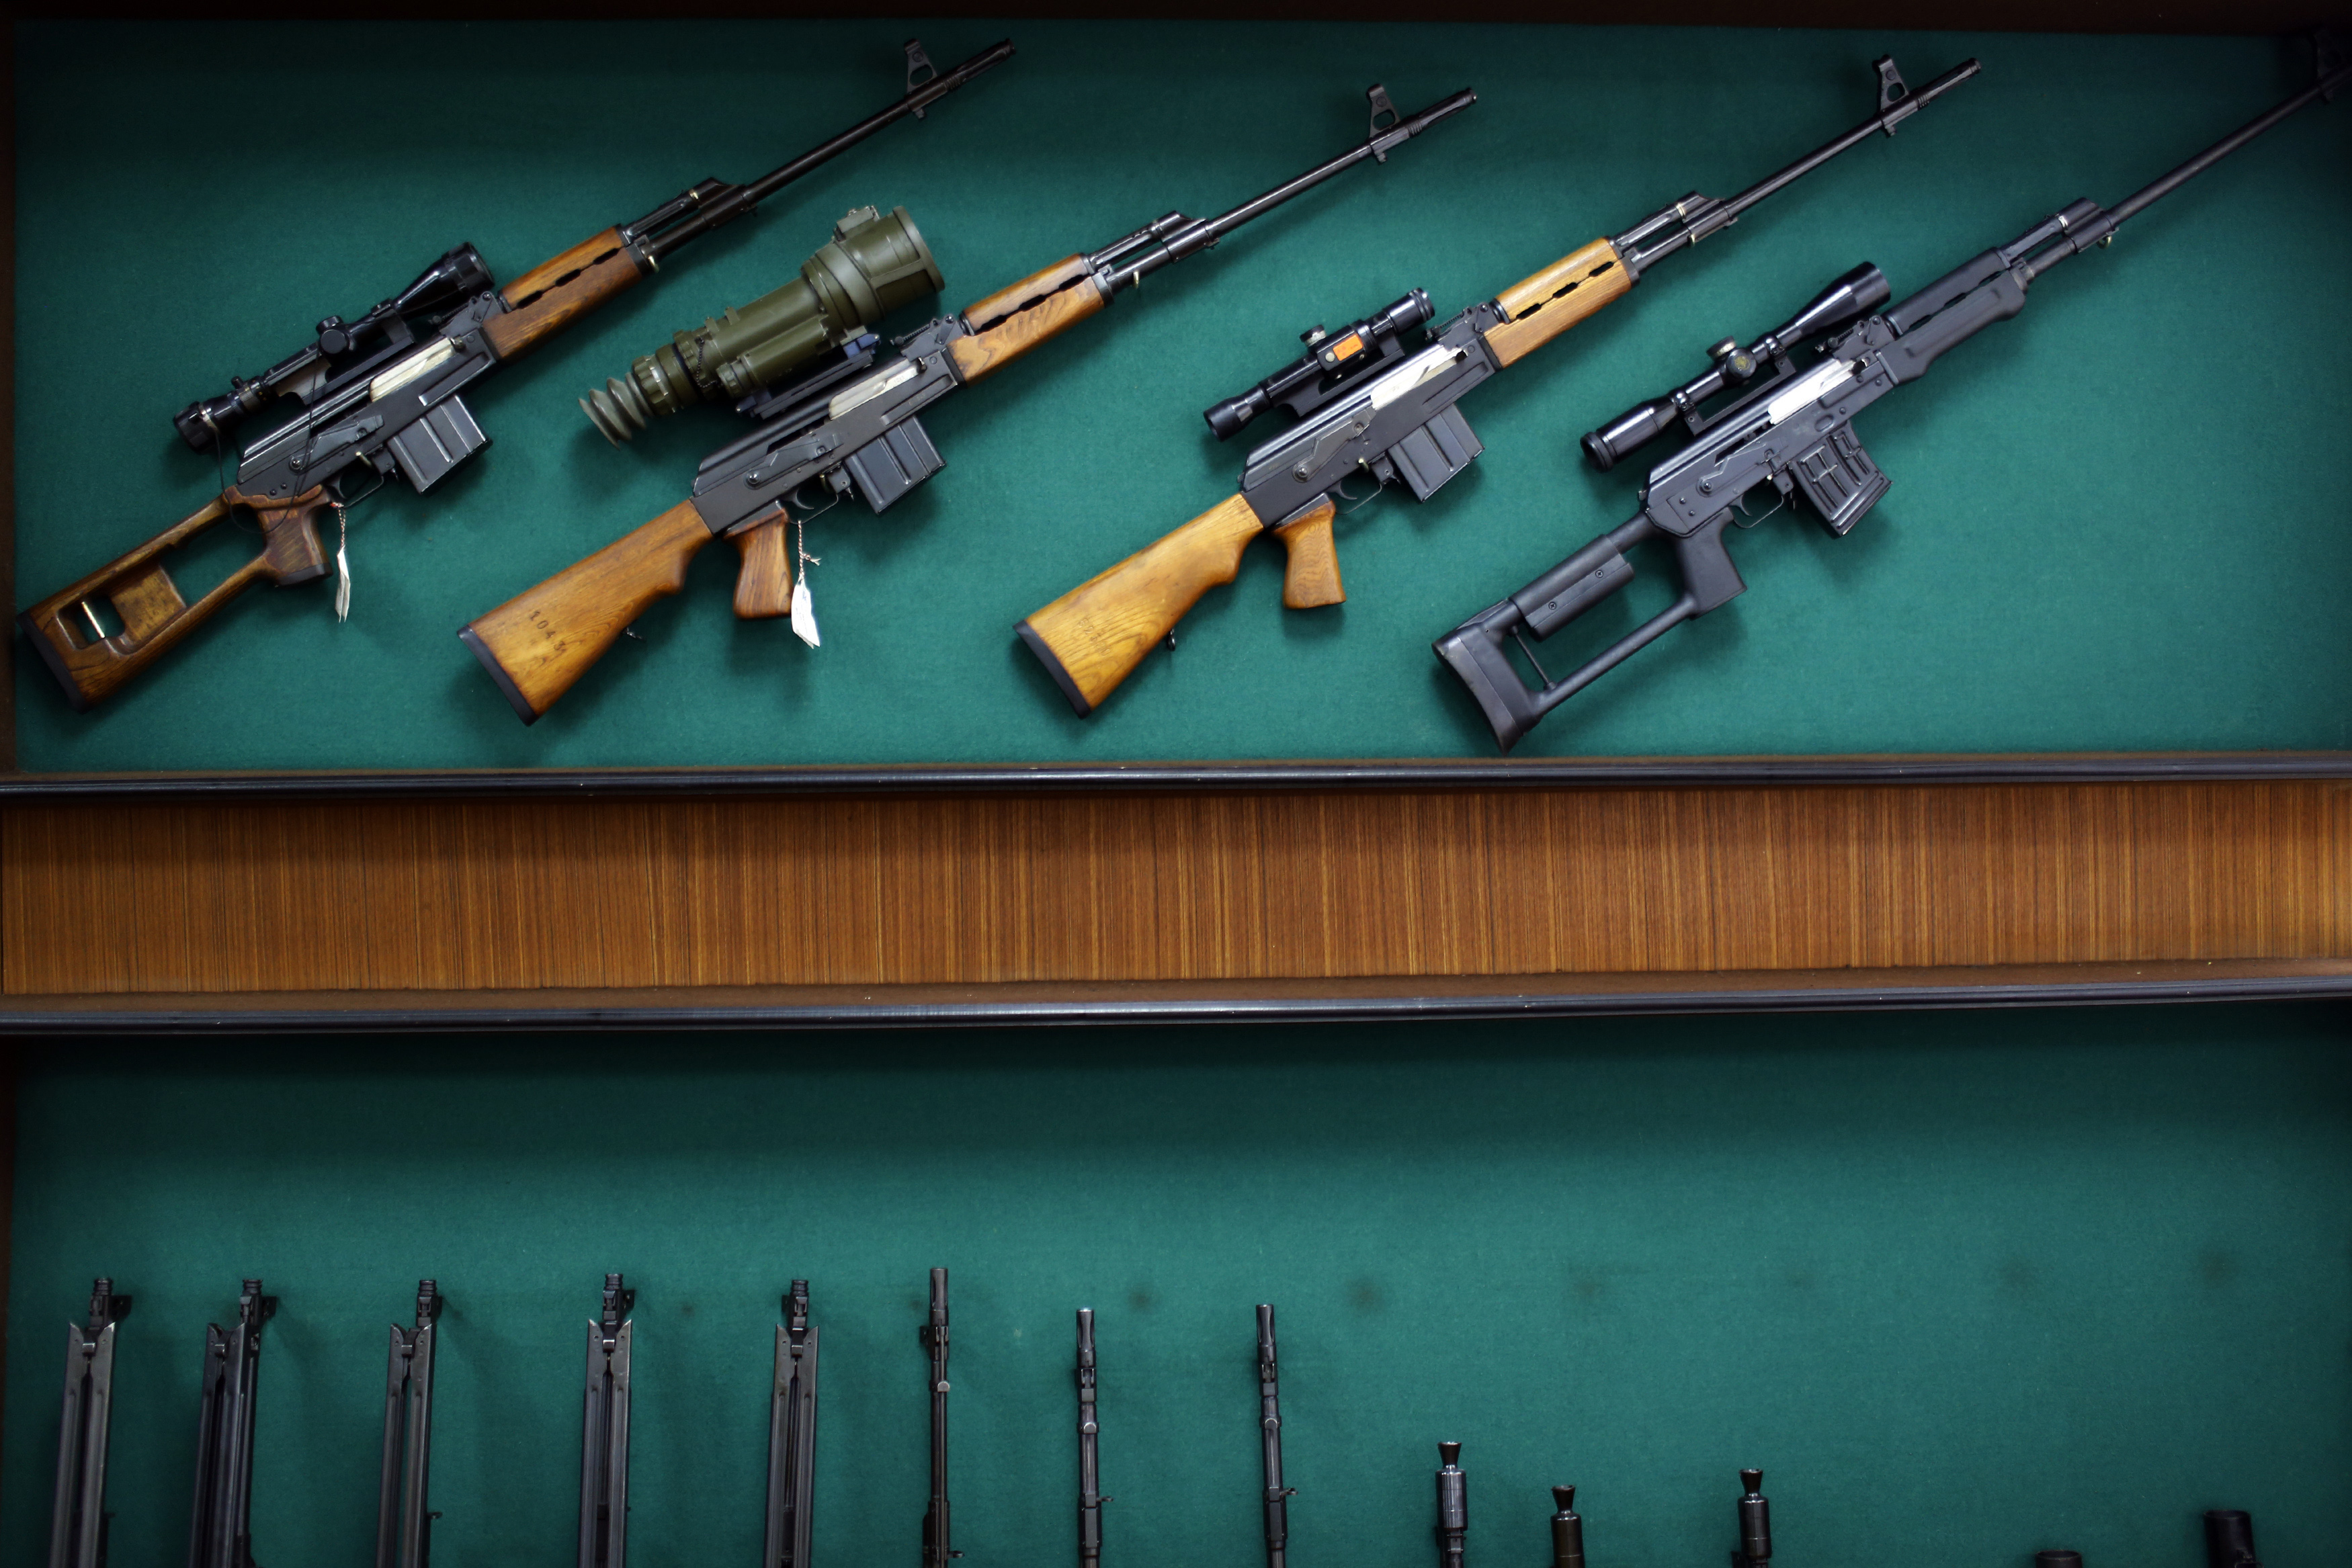 Rifles are displayed in the exhibition hall of the "Zastava Arms" weapons factory in the Serbian town of Kragujevac, some 137km (85 miles) from capital Belgrade, May 8, 2013. Now, knocking on the door of the European Union, one industry in Serbia is leading the way where others have been ravaged by a painful transition to capitalism: guns. Serbia is clawing back old markets for its weapons and ammunition in Africa and the Middle East and former arch foe the U.S., which led the 1999 NATO air war against Slobodan Milosevic. In a country of 25 percent unemployment, weapons producers are adding workers year after year with the value of export contracts now pushing $300 million annually, according to state weapons' exporter Yugoimport-SDPR. Picture taken May 8, 2013. REUTERS/Marko Djurica (SERBIA - Tags: BUSINESS MILITARY)